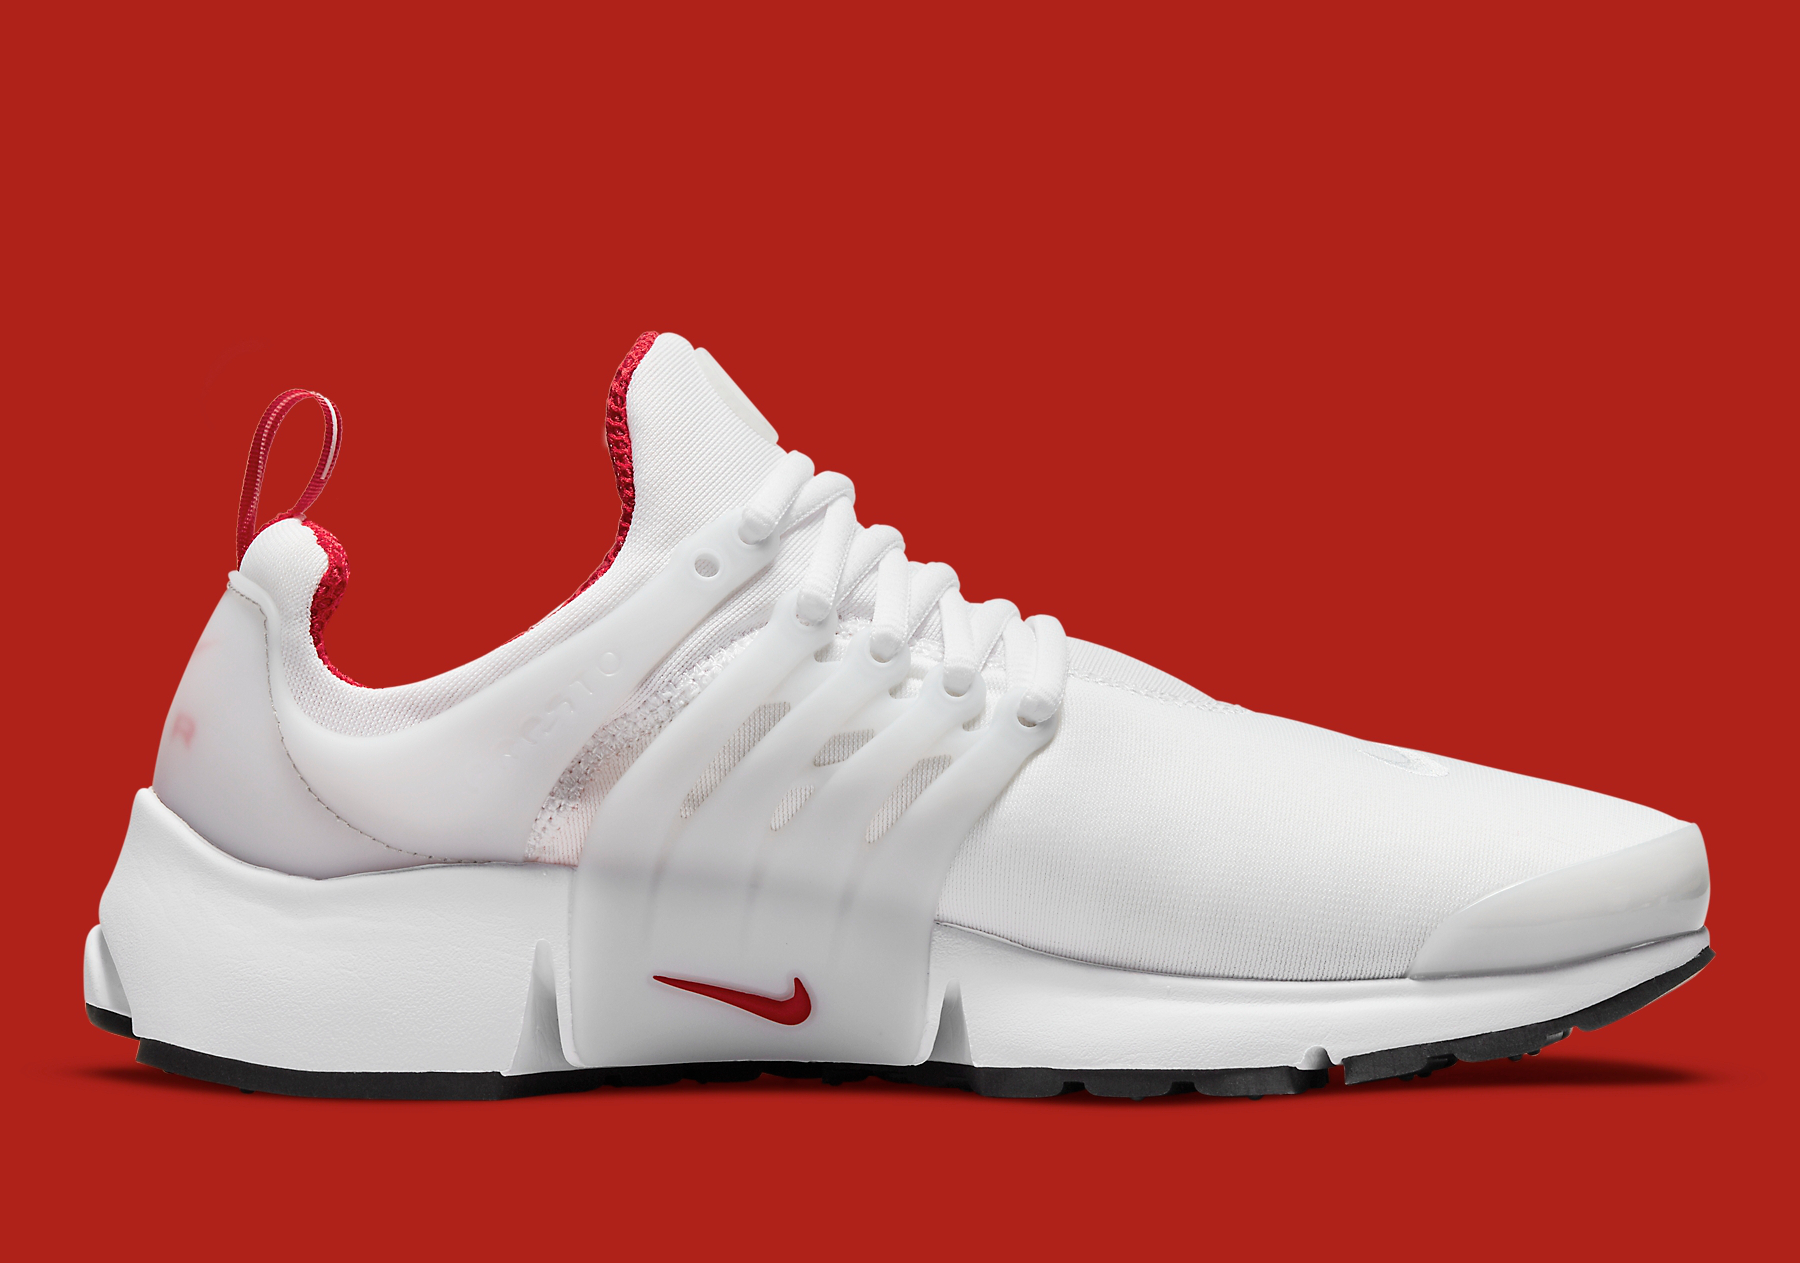 how to clean nike presto